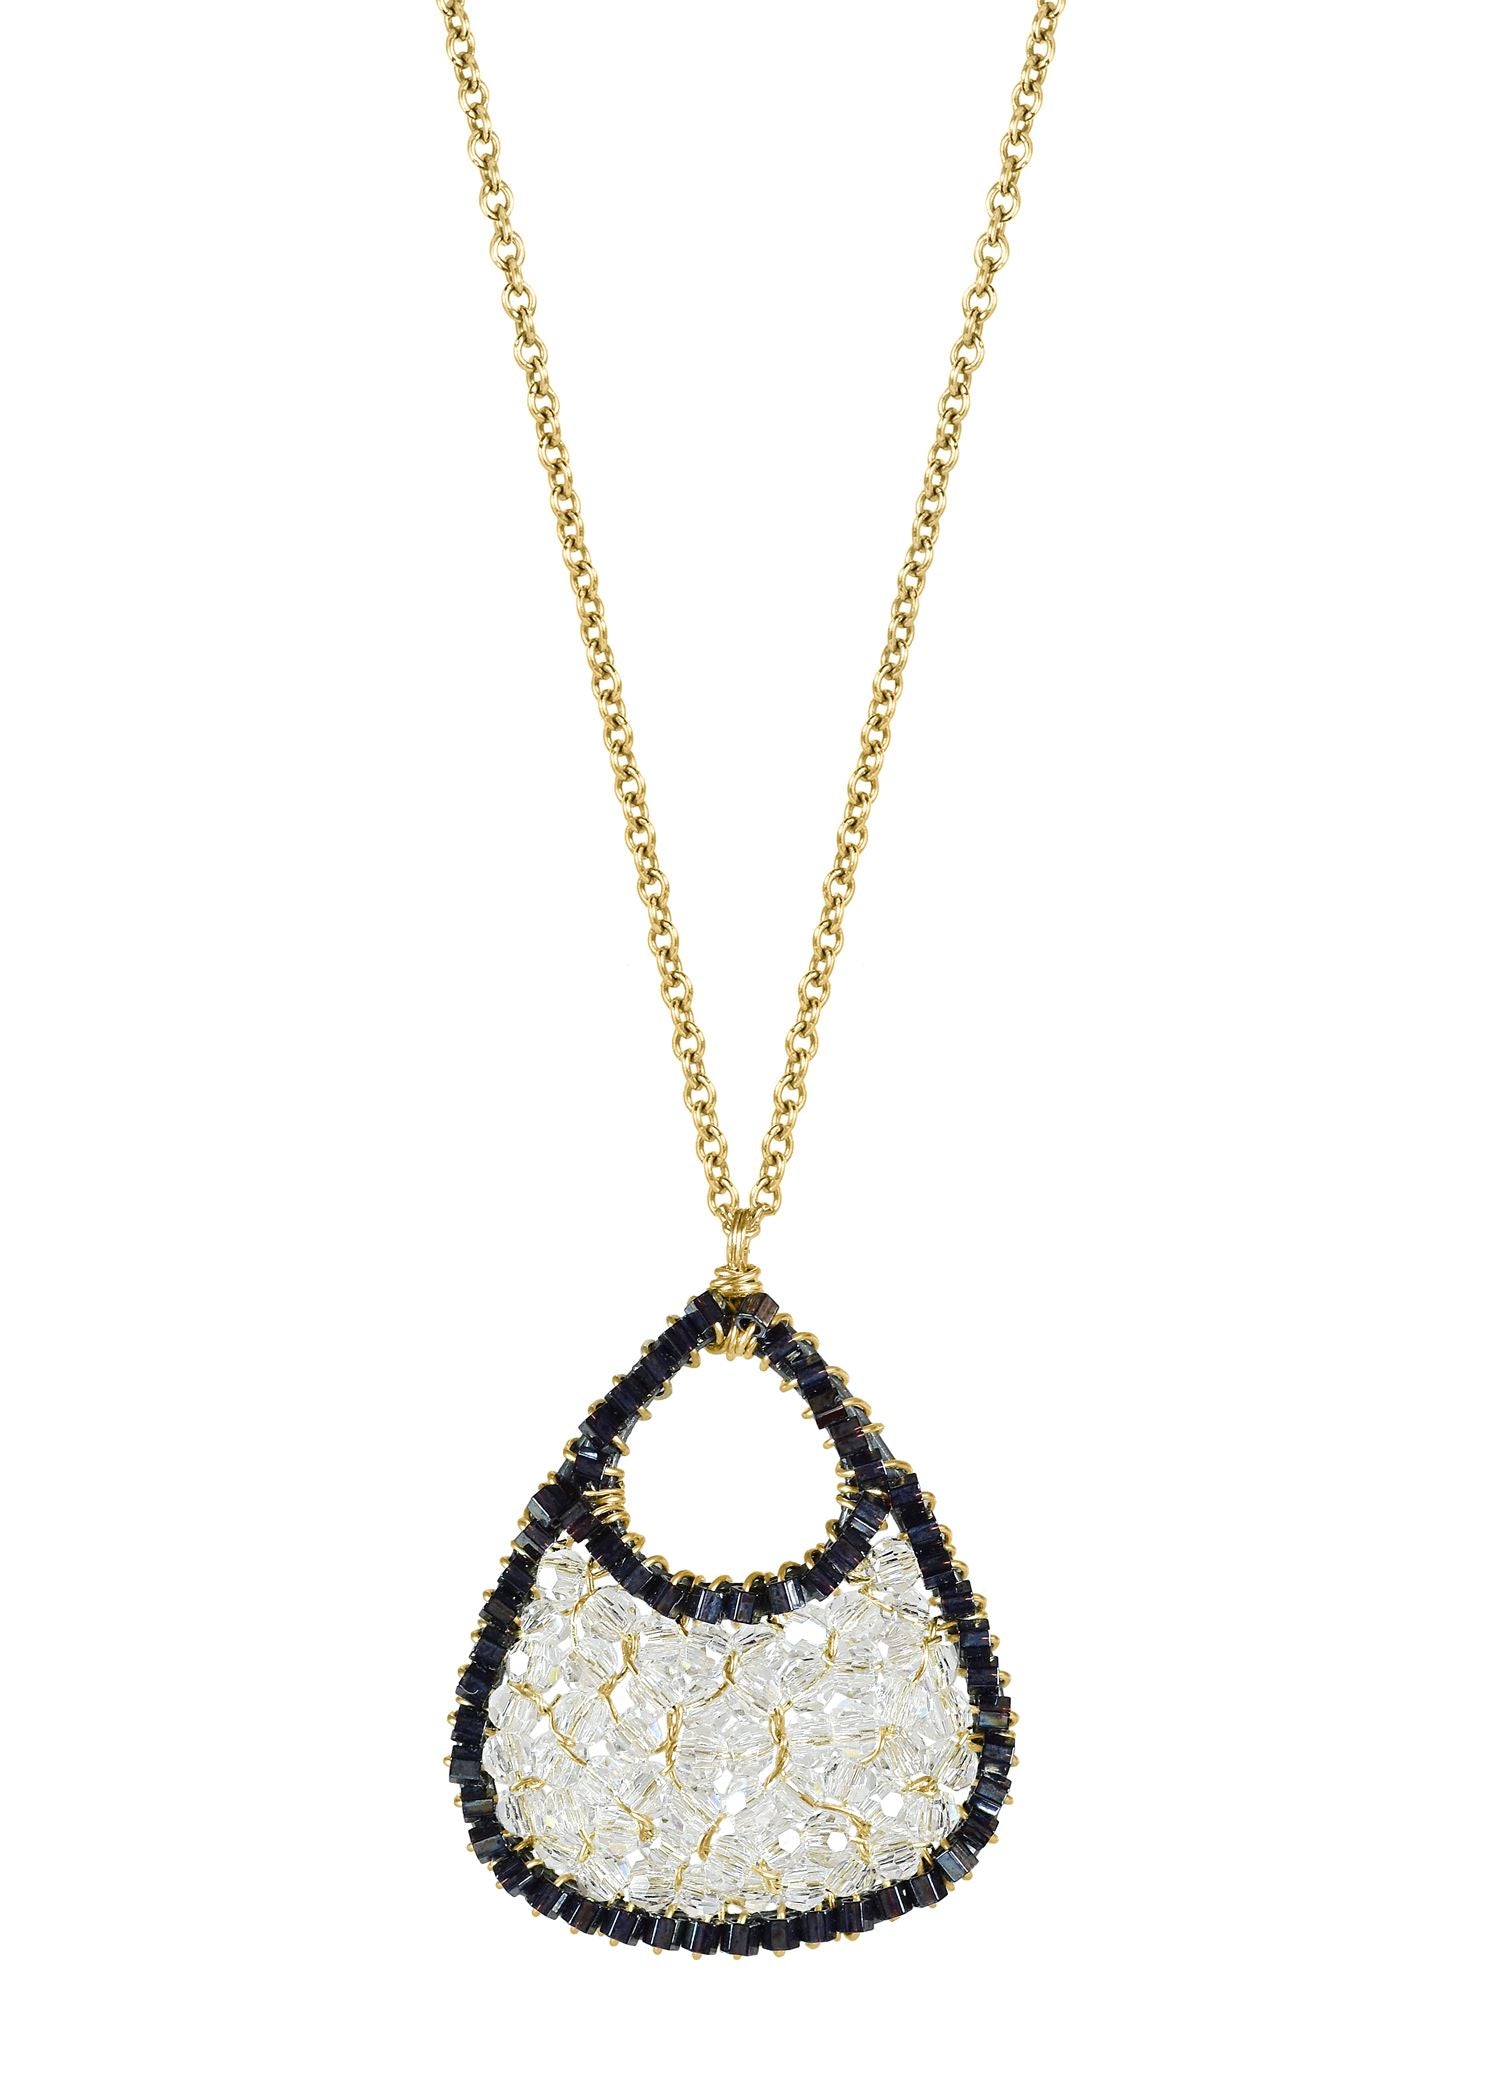 Crystal Dark hematite seed beads 14k gold fill Necklace measures 16-1/4" long Pendant measures 15/16" in length and 3/4" in width Handmade in our Los Angeles studio